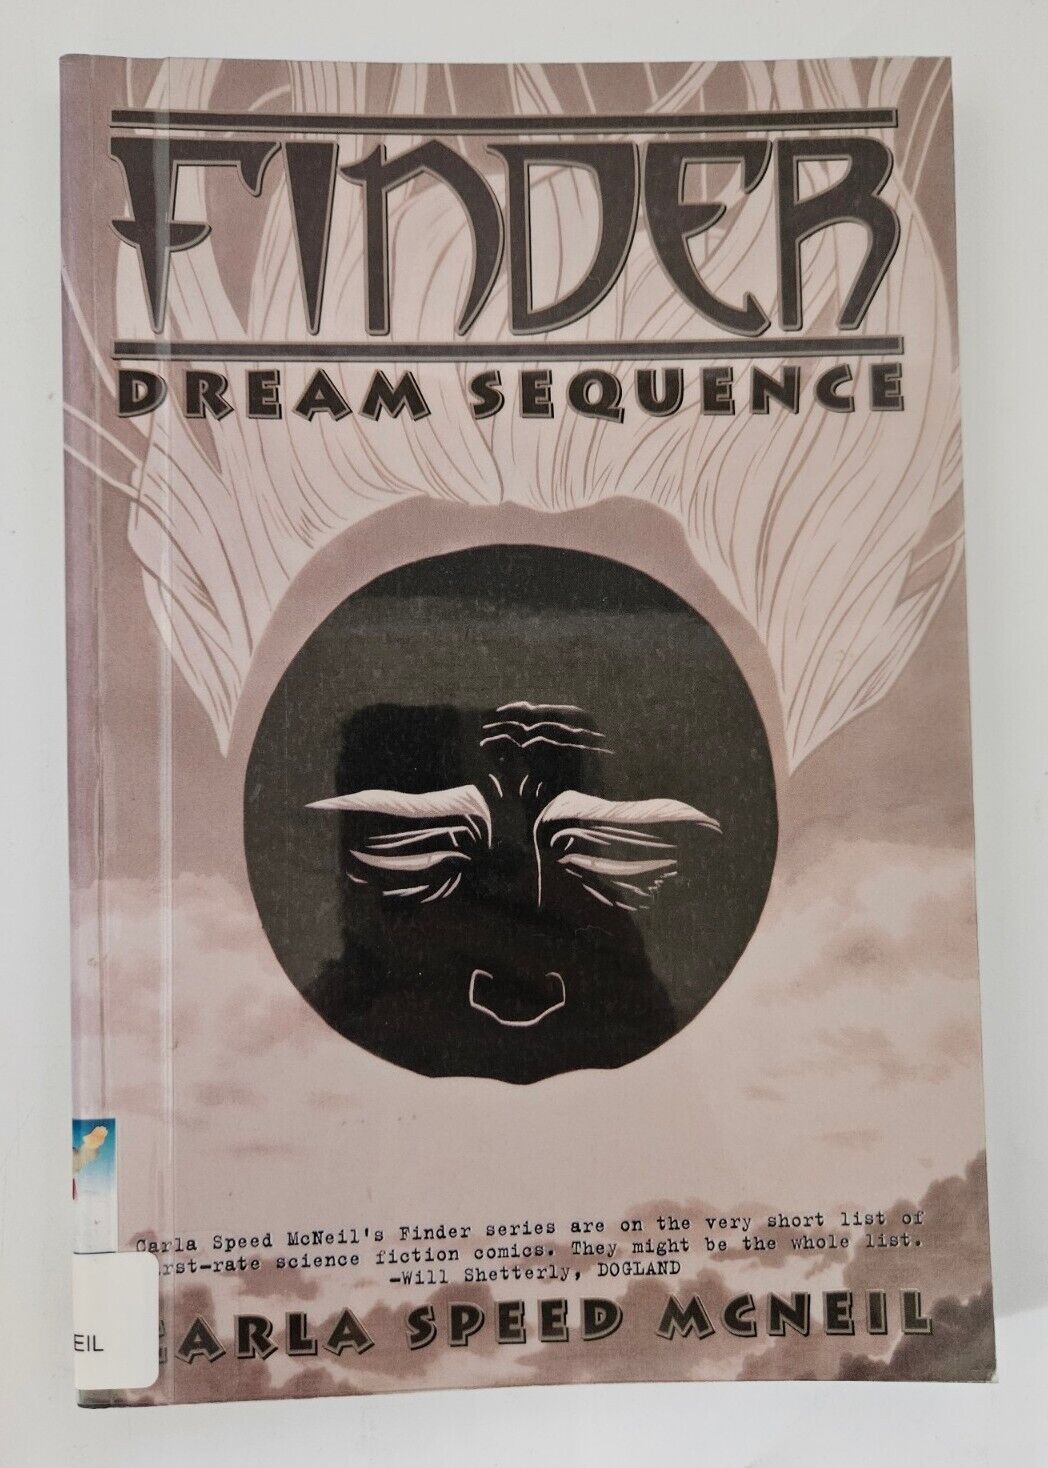 FINDER: DREAM SEQUENCE By Carla Speed Mcneil 